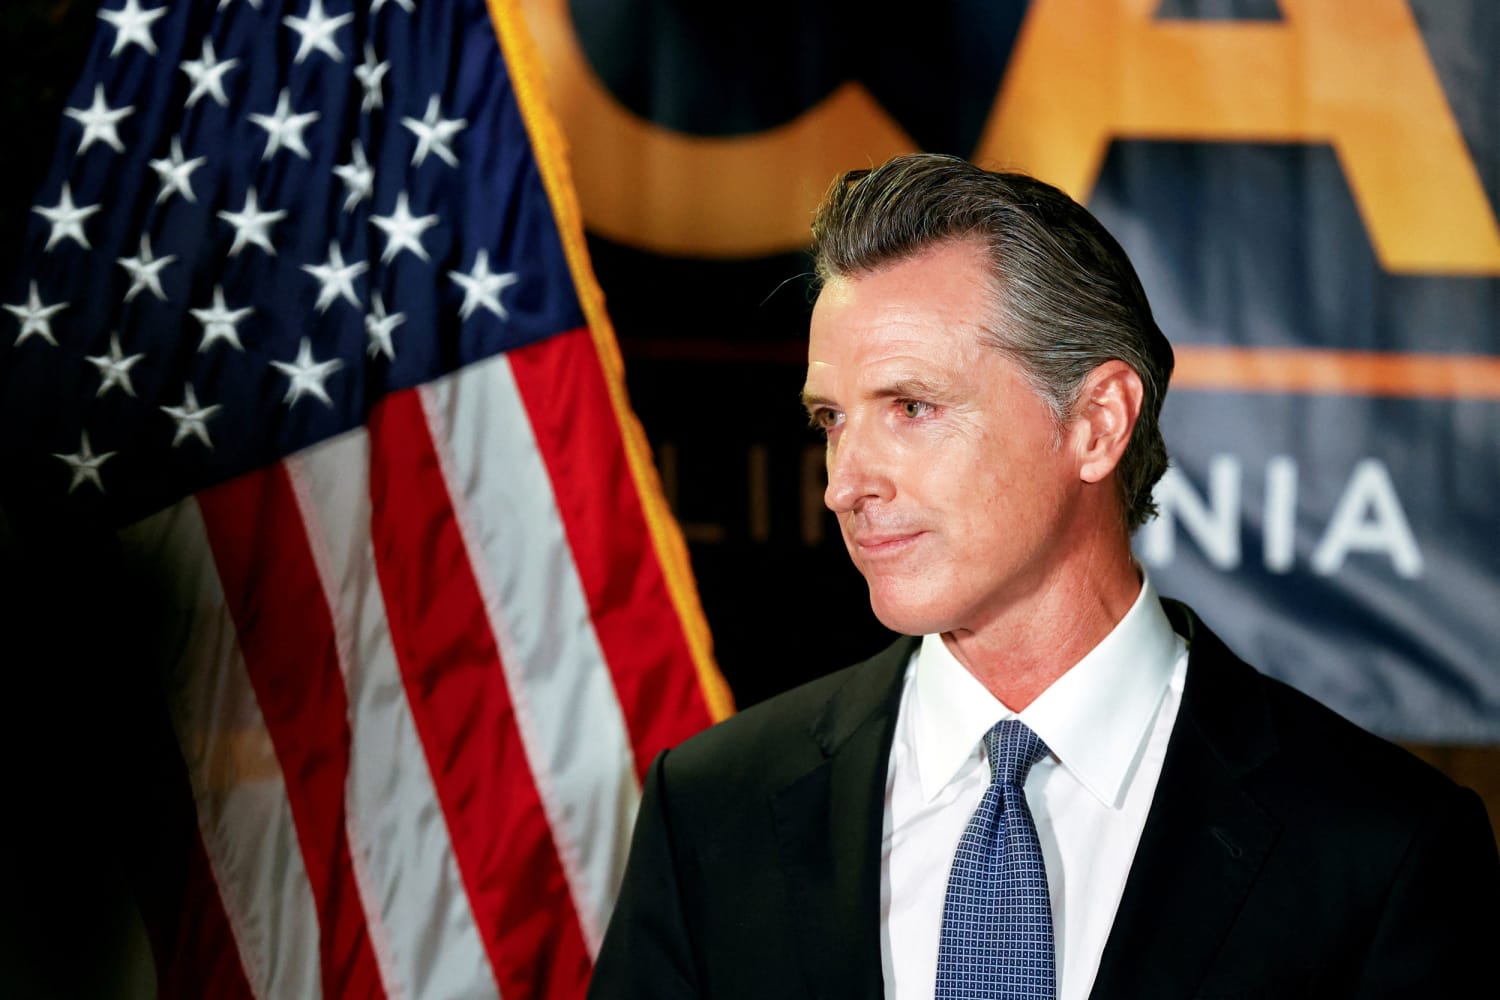 Newsom says he will use Texas abortion law tactics to restrict assault weapons